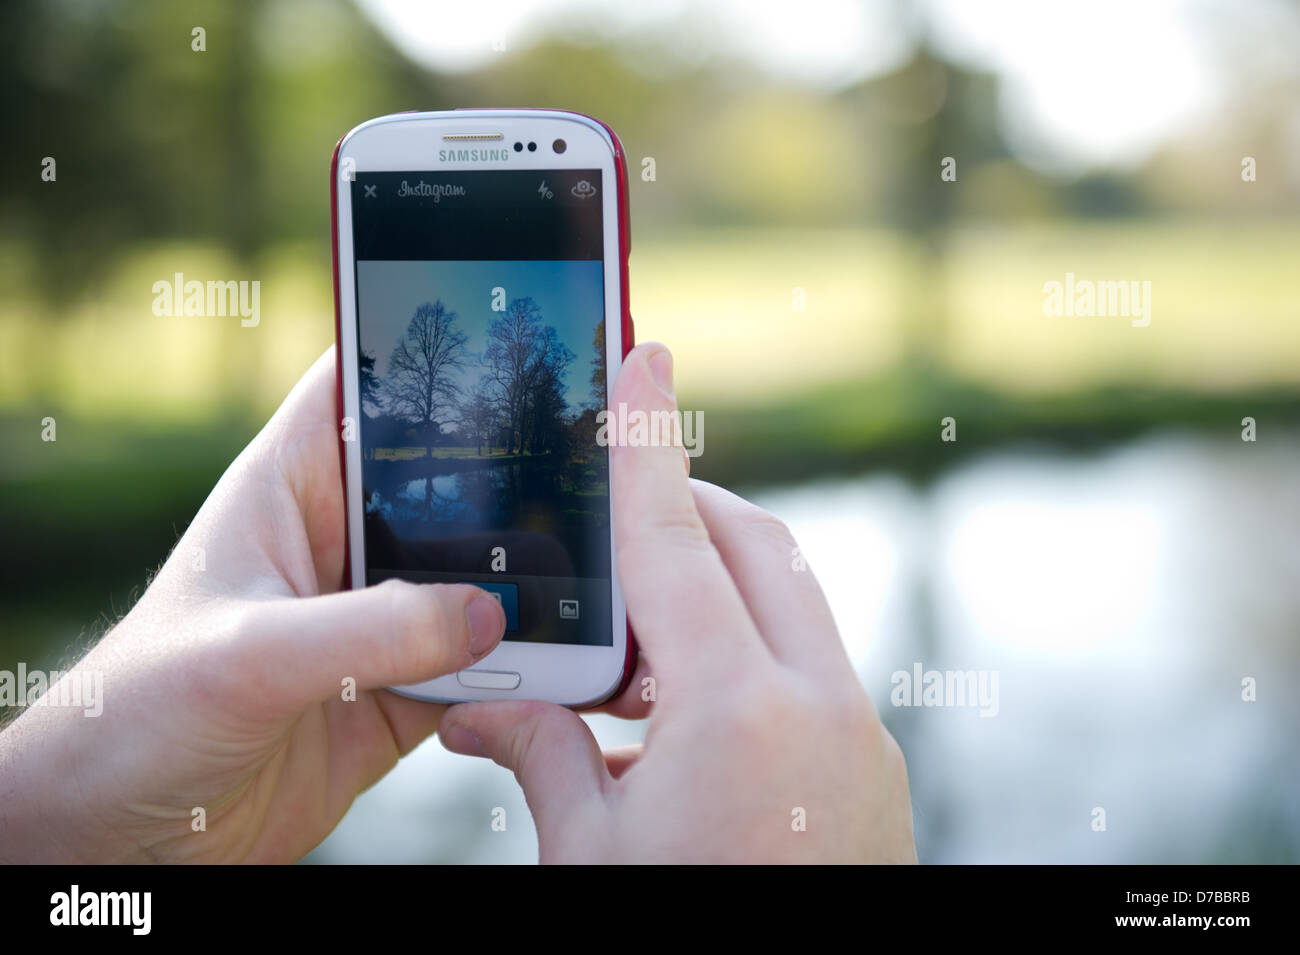 Hands are seen holding a Samsung Galaxy S3 phone, taking a photo of a park scene on the Instagram app of a river in a park. Stock Photo